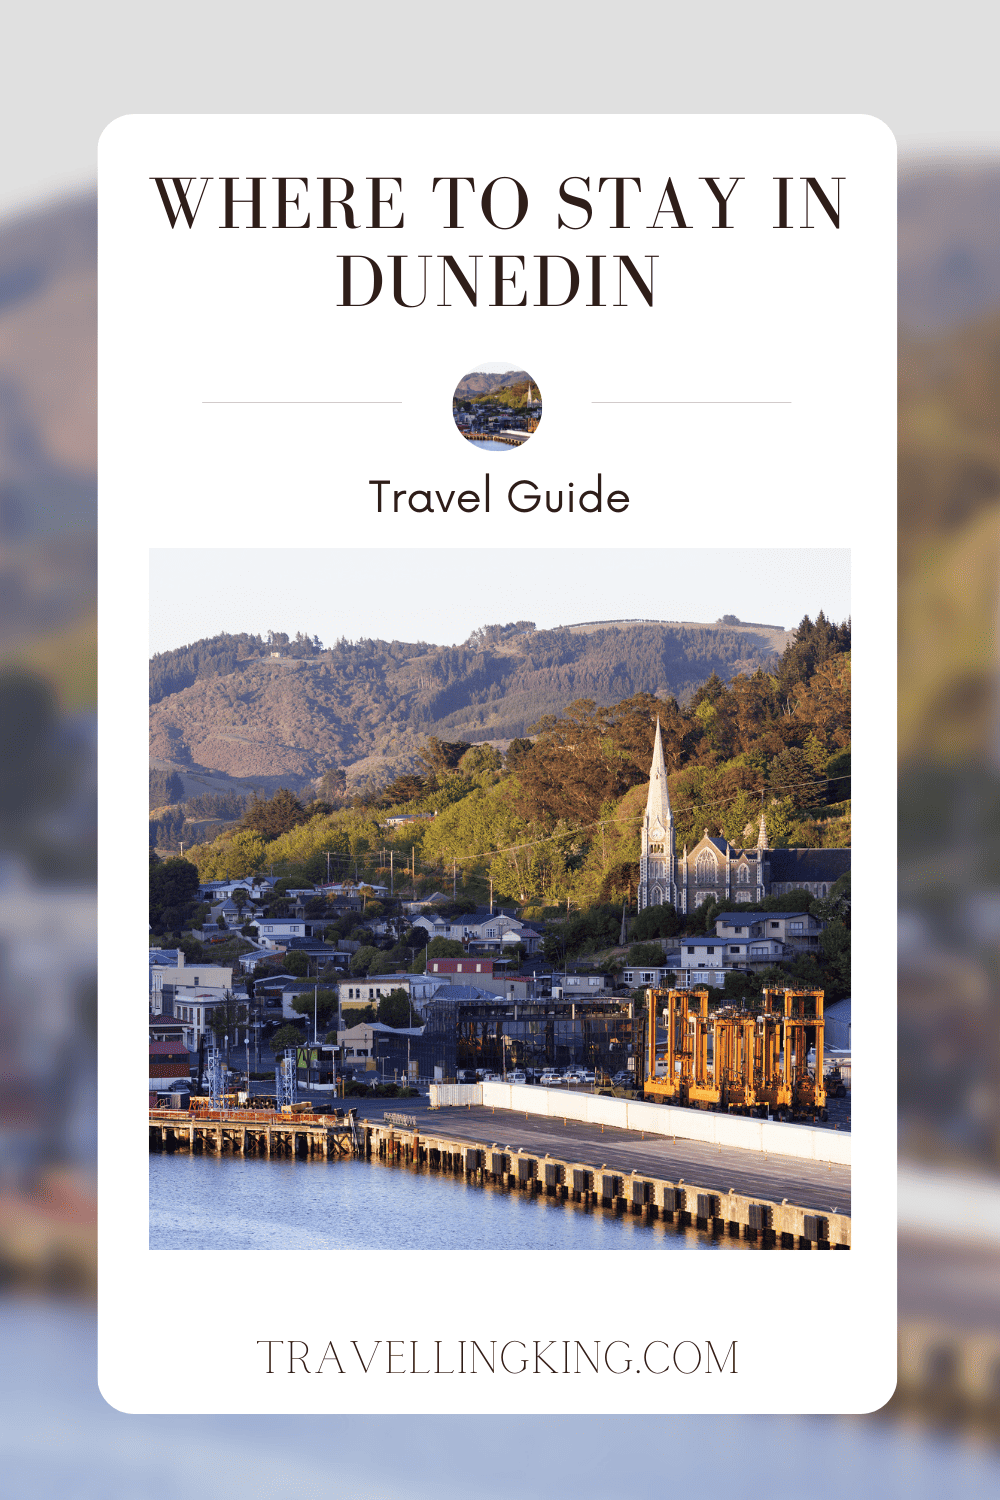 Where to stay in Dunedin